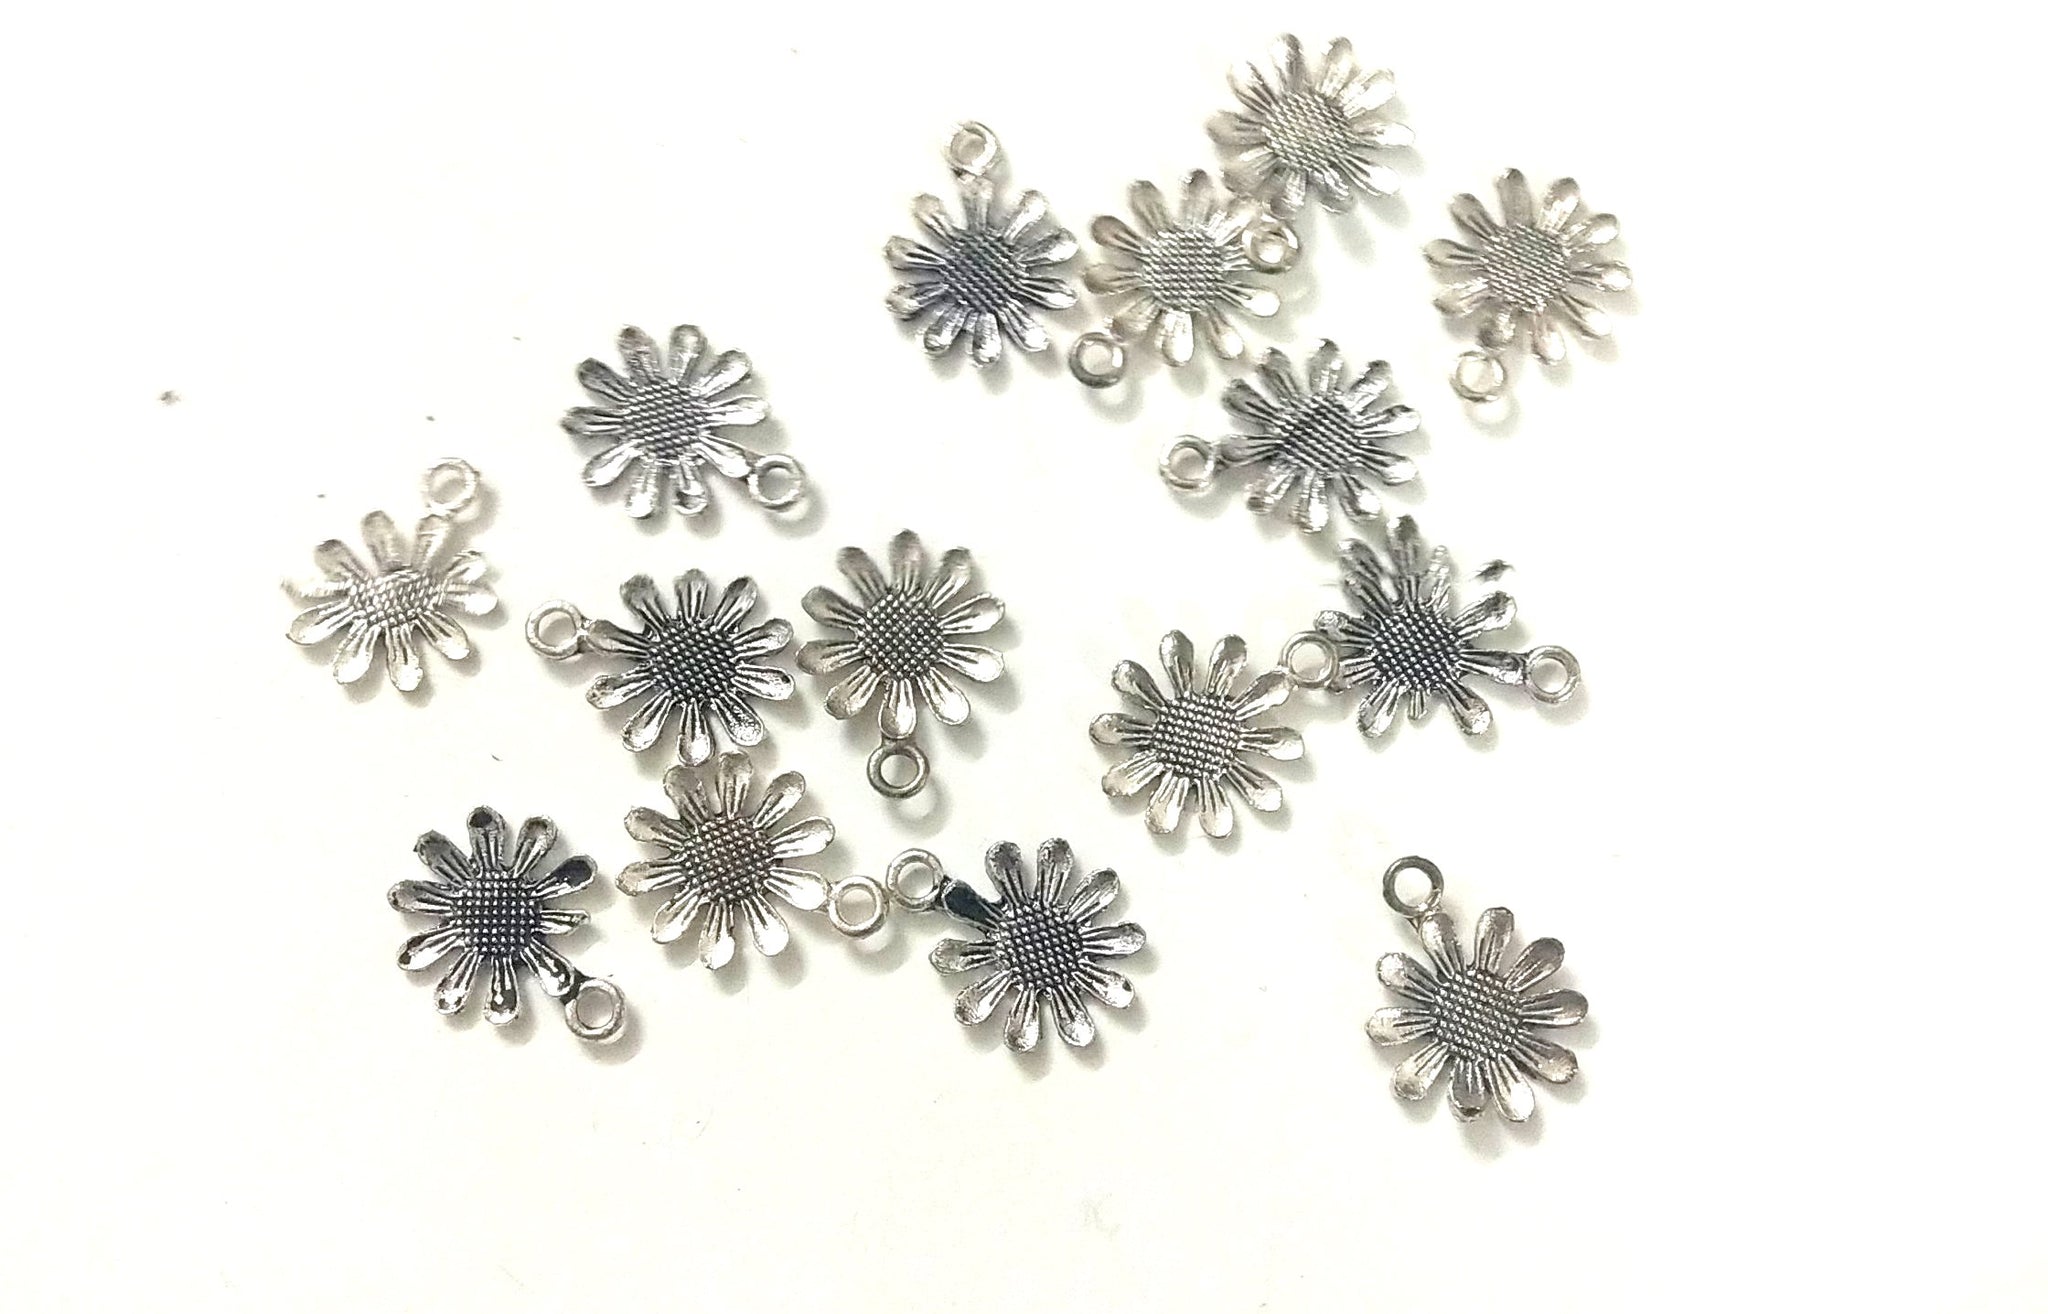 WOCRAFT 100g(80pcs) Craft Supplies Antique Silver Yoga OM Lotus Flower  Charms for Jewelry Making Crafting Findings Accessory for DIY Necklace  Bracelet (M294)